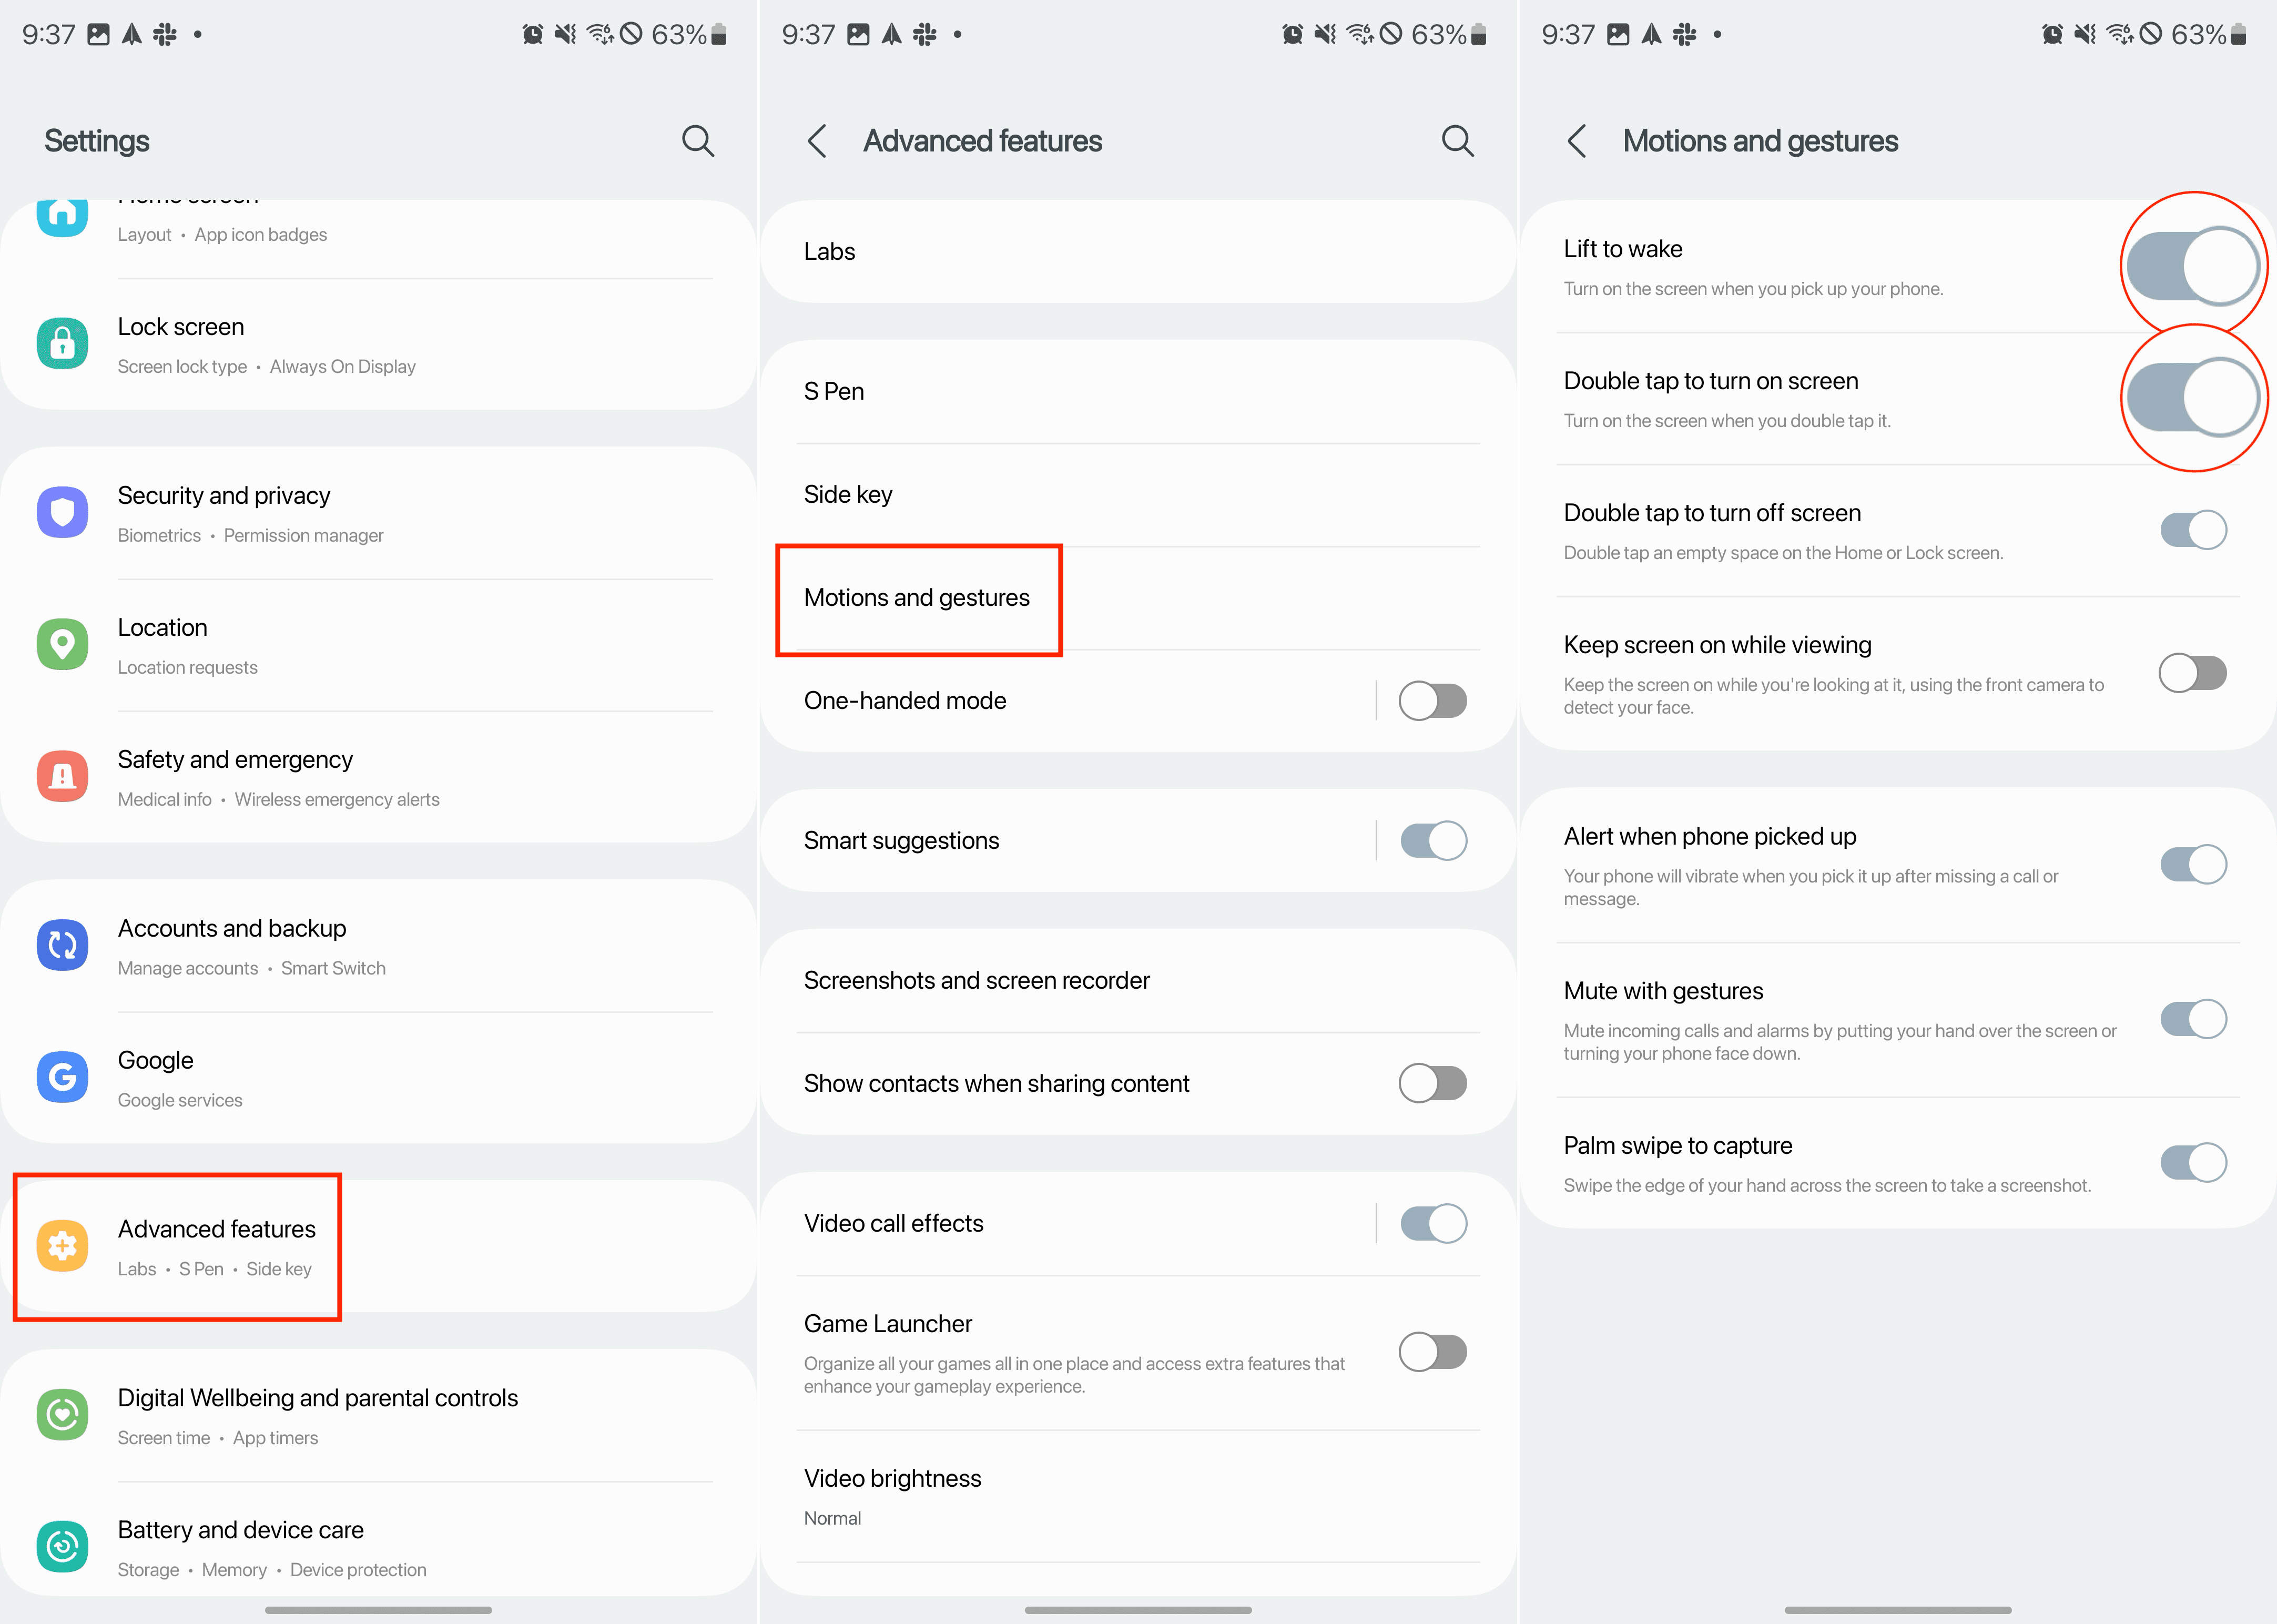 How to prevent accidental butt-dialing in Android - Lift and Tap to wake